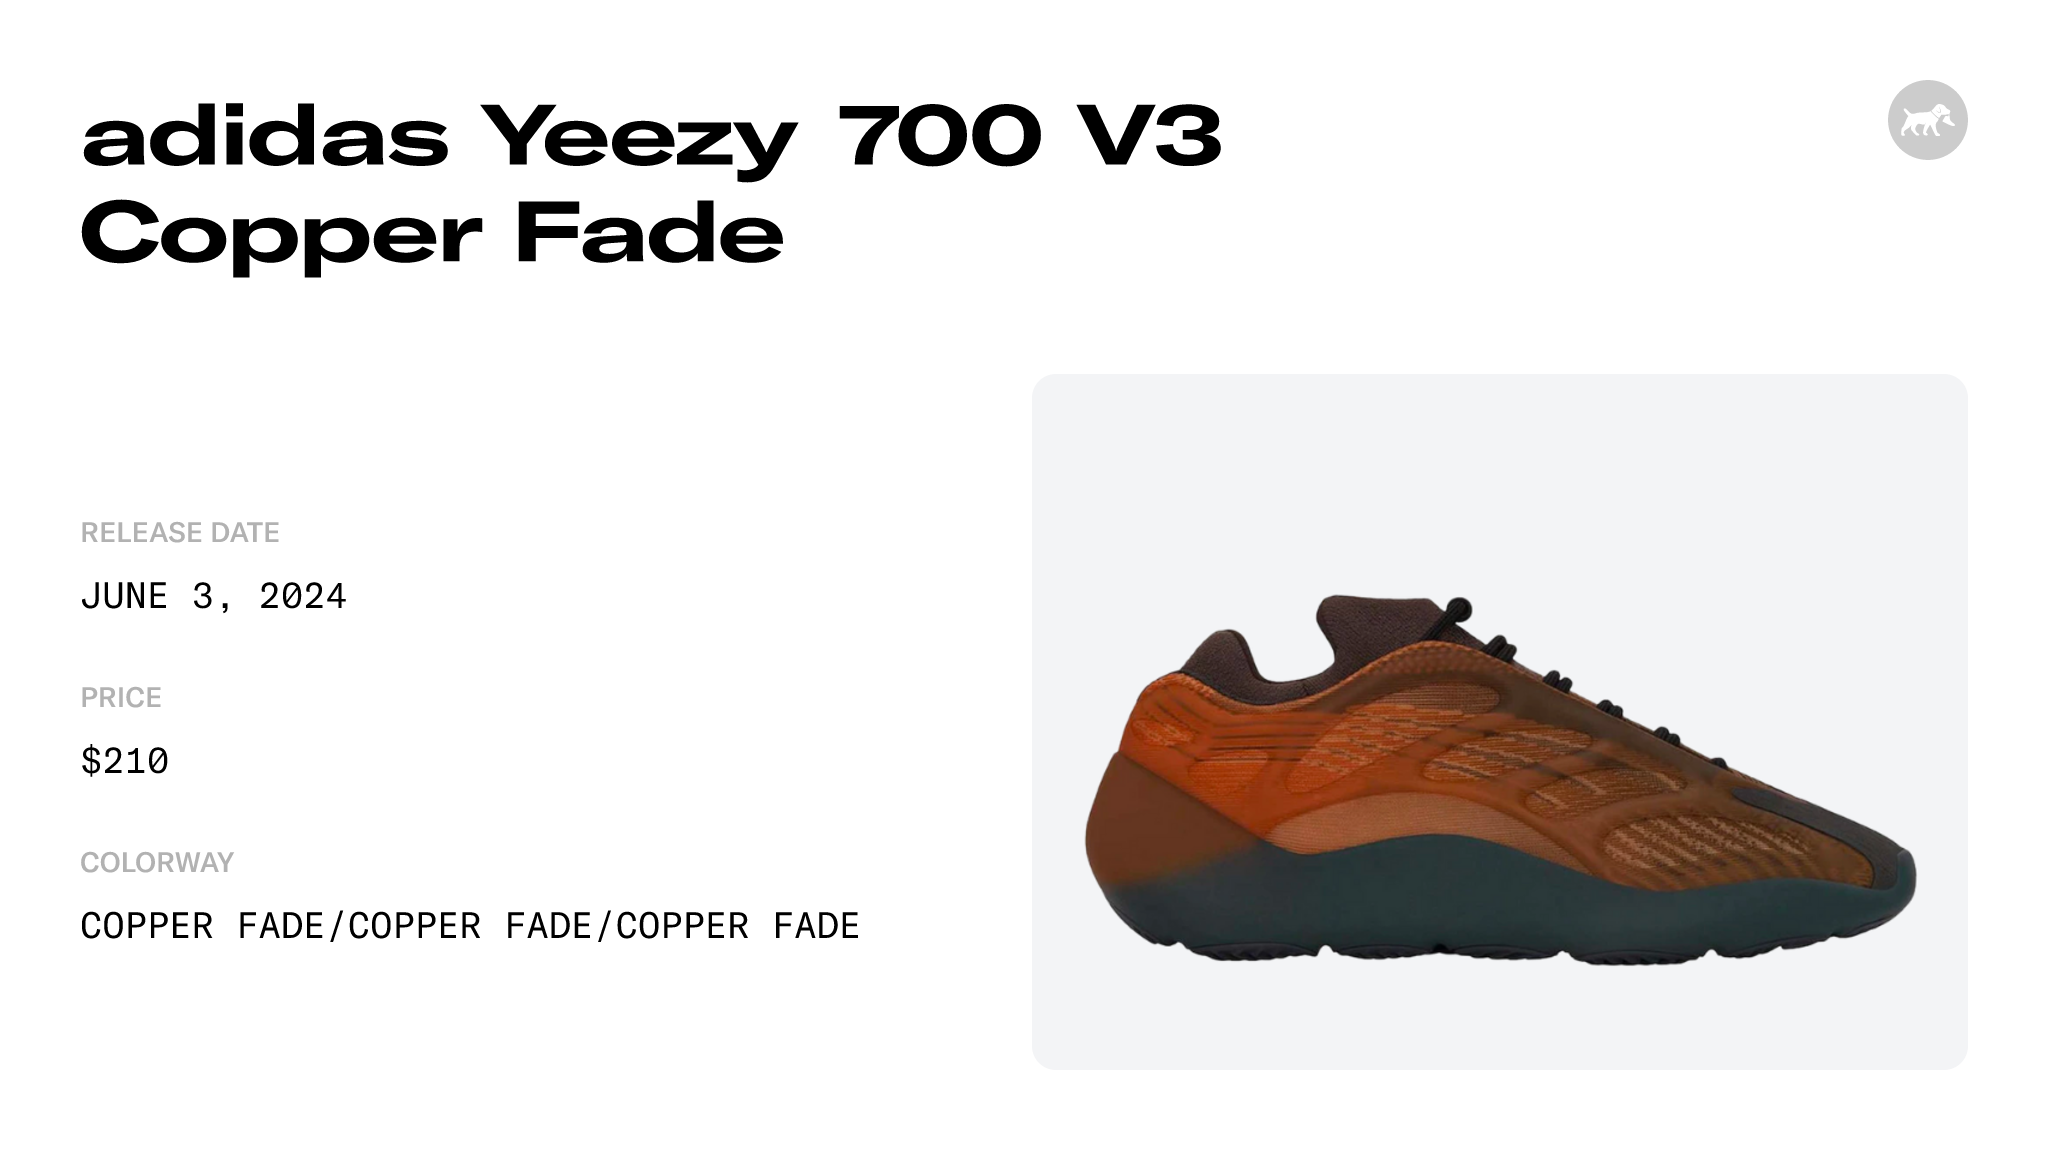 adidas Yeezy 700 V3 Copper Fade - GY4109 Raffles and Release Date